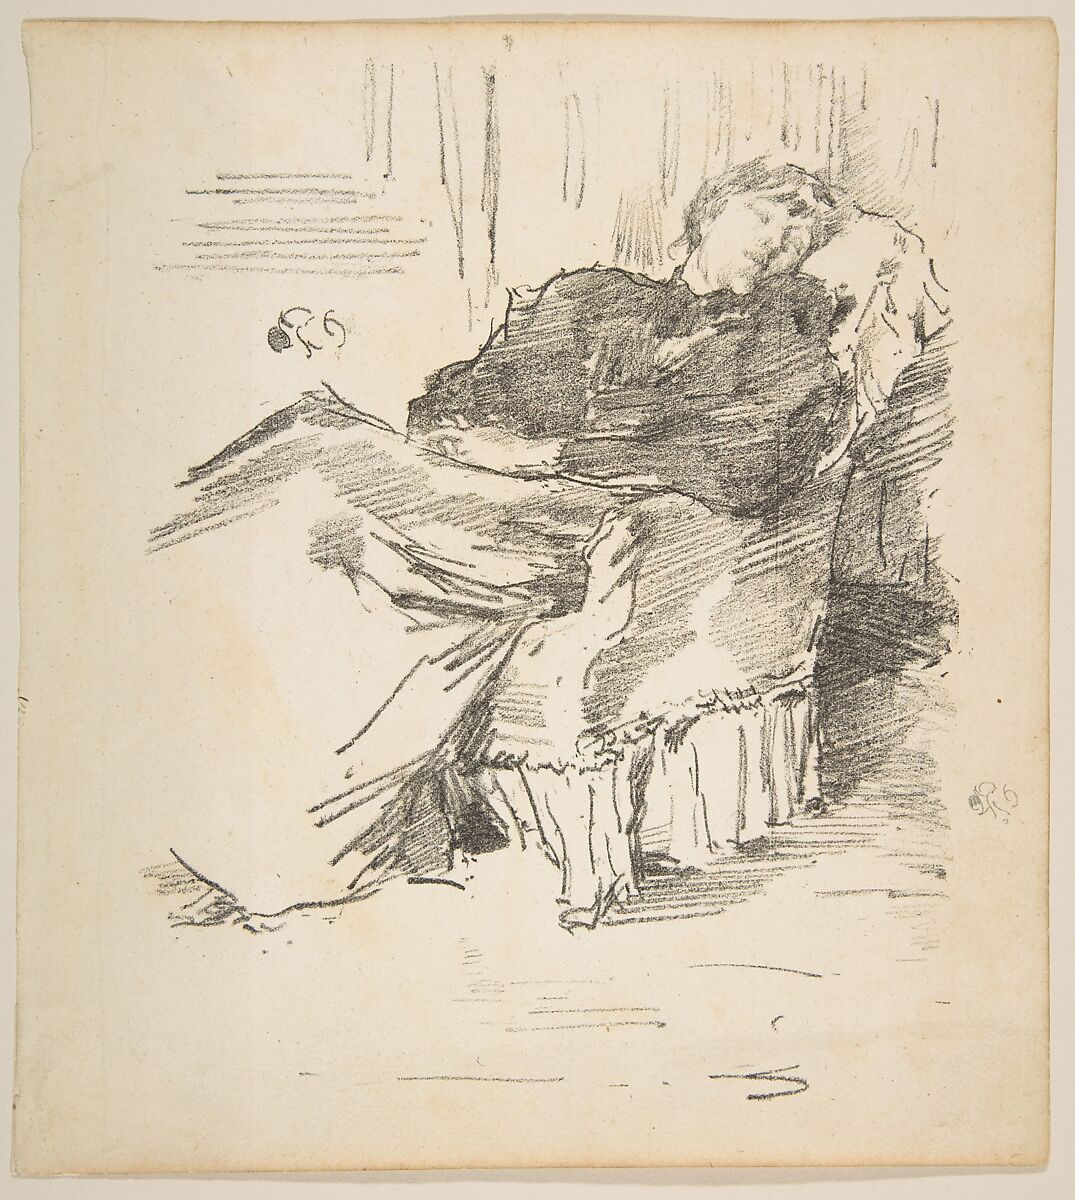 La Belle Dame Endormie (The Beautiful Woman Asleep), James McNeill Whistler (American, Lowell, Massachusetts 1834–1903 London), Transfer lithograph; only state (Chicago); printed in black ink on medium weight ivory laid paper 